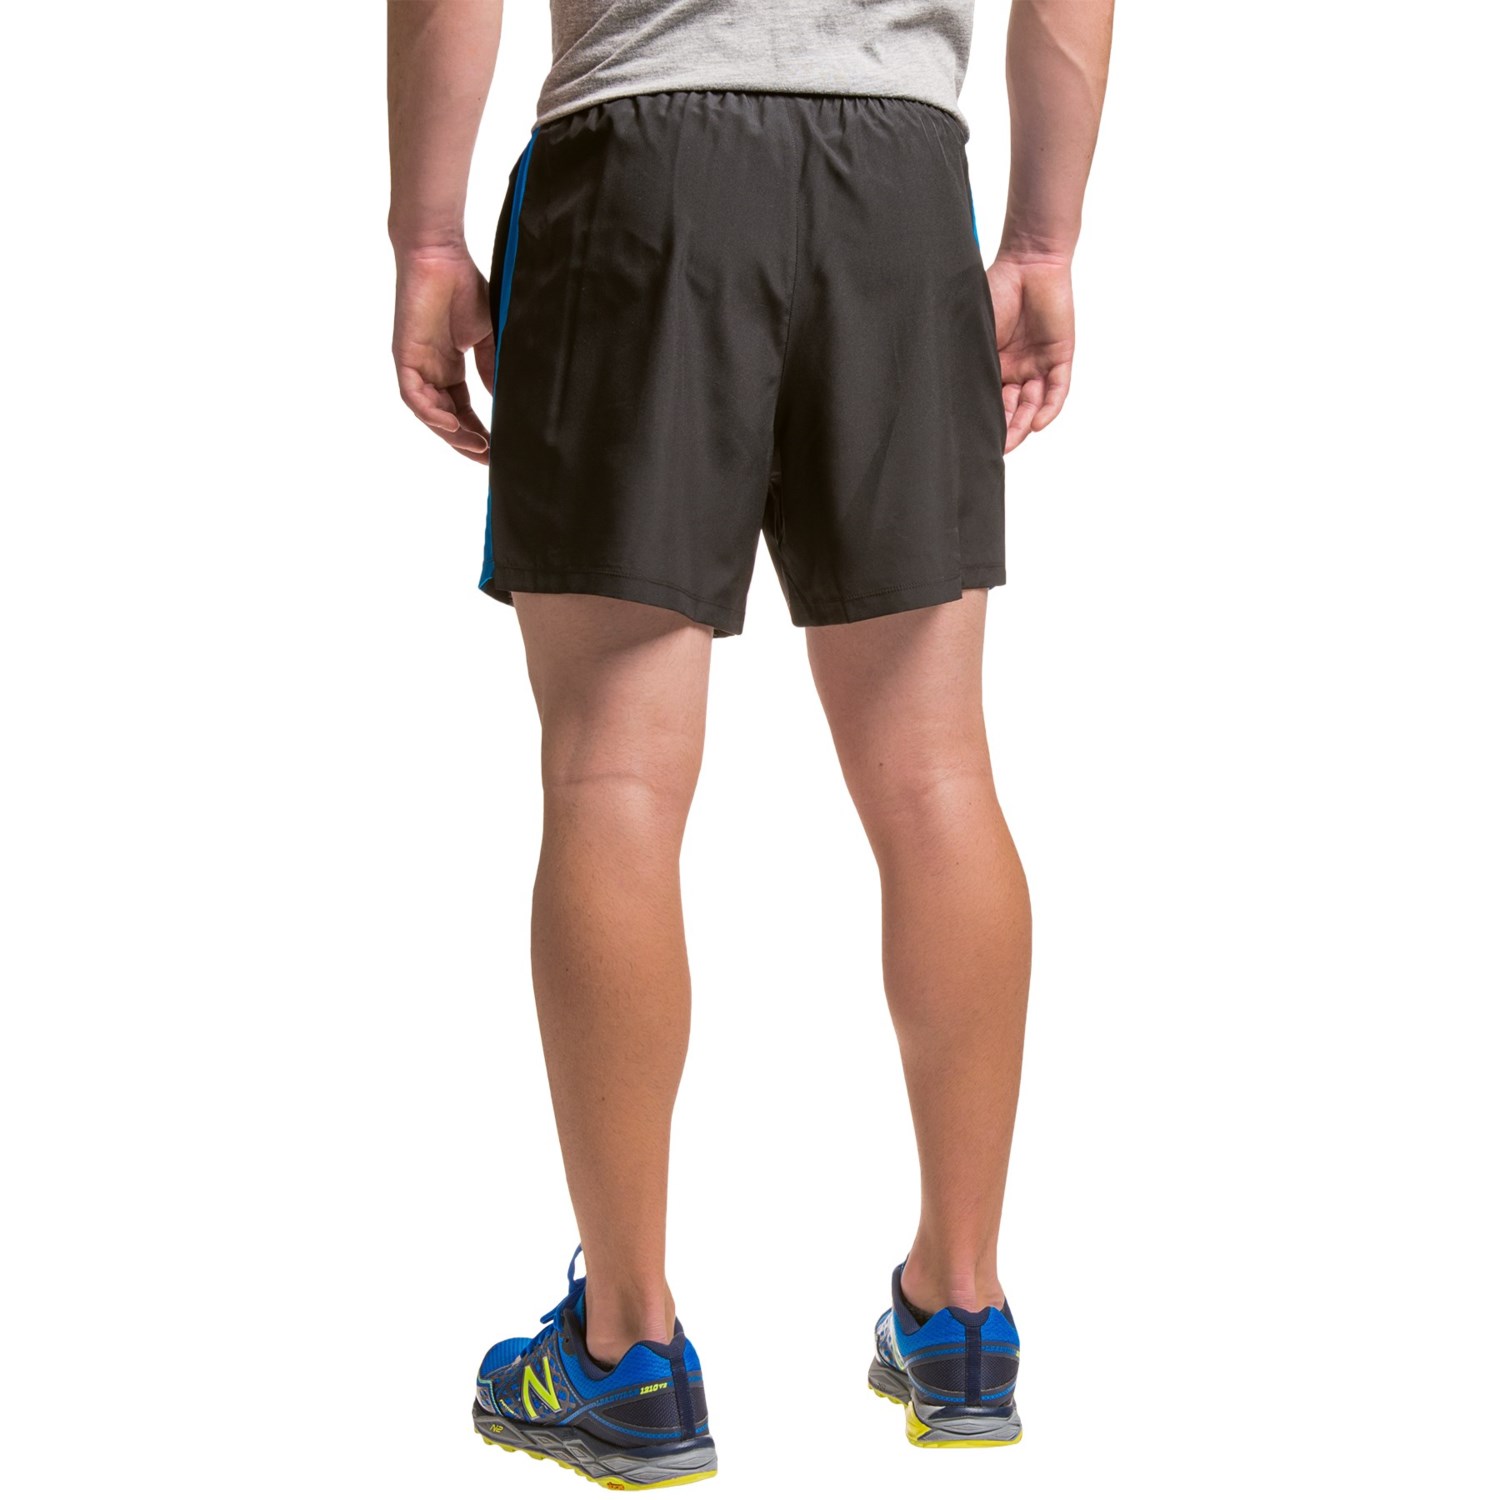 New Balance Accelerate 5” Shorts (For Men) - Save 50%